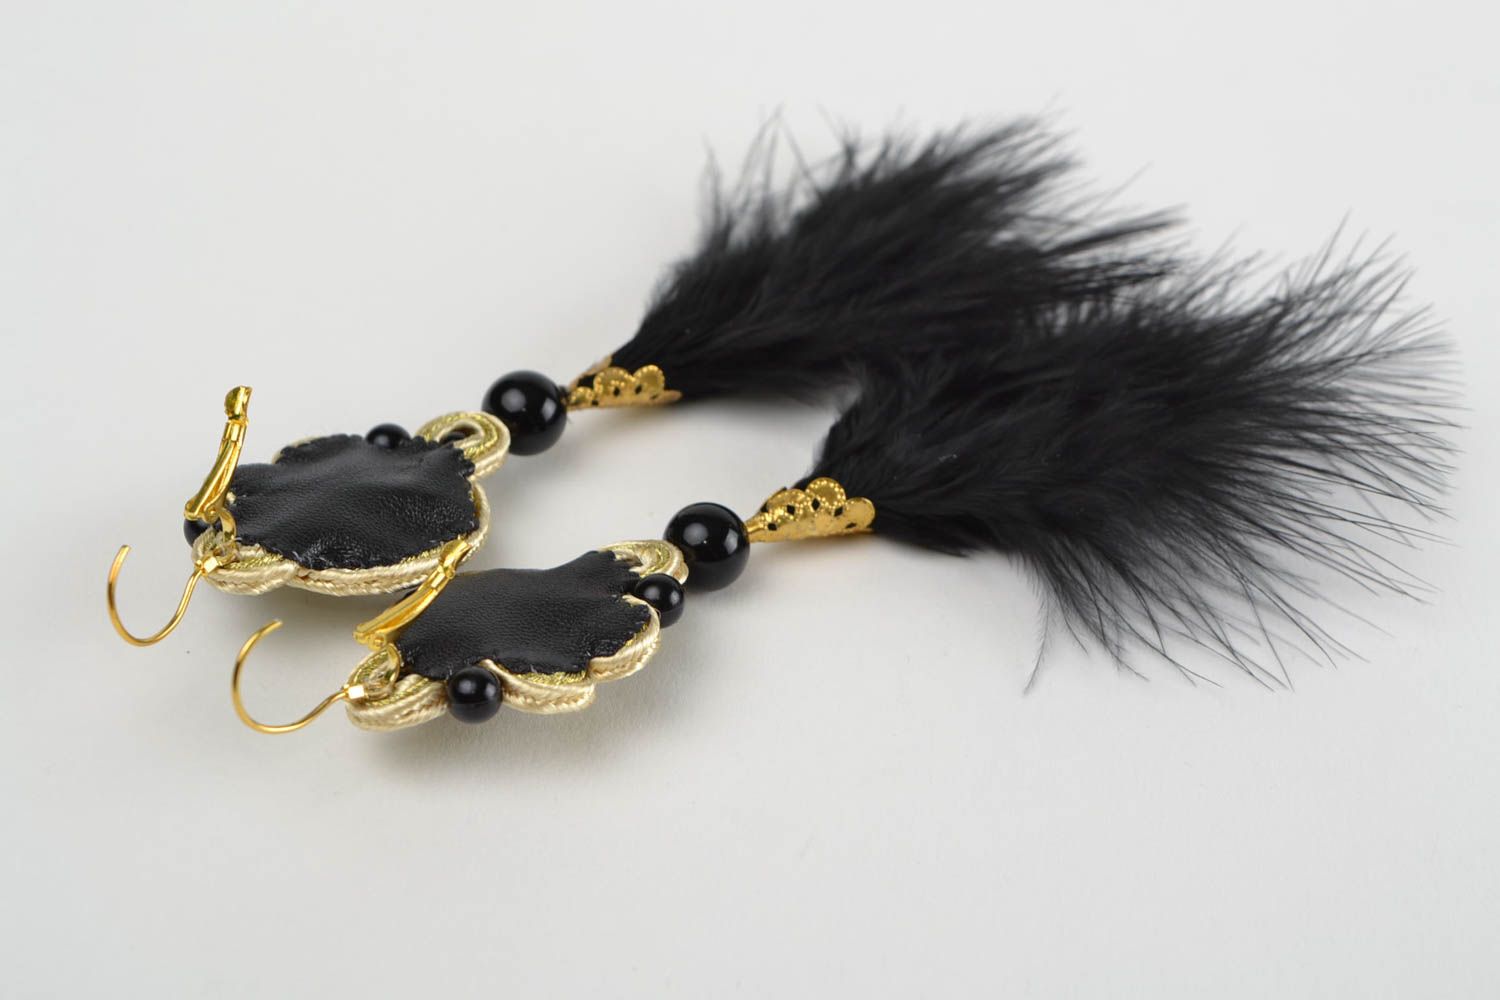 Handmade designer long soutache earrings with natural stones and feathers photo 5